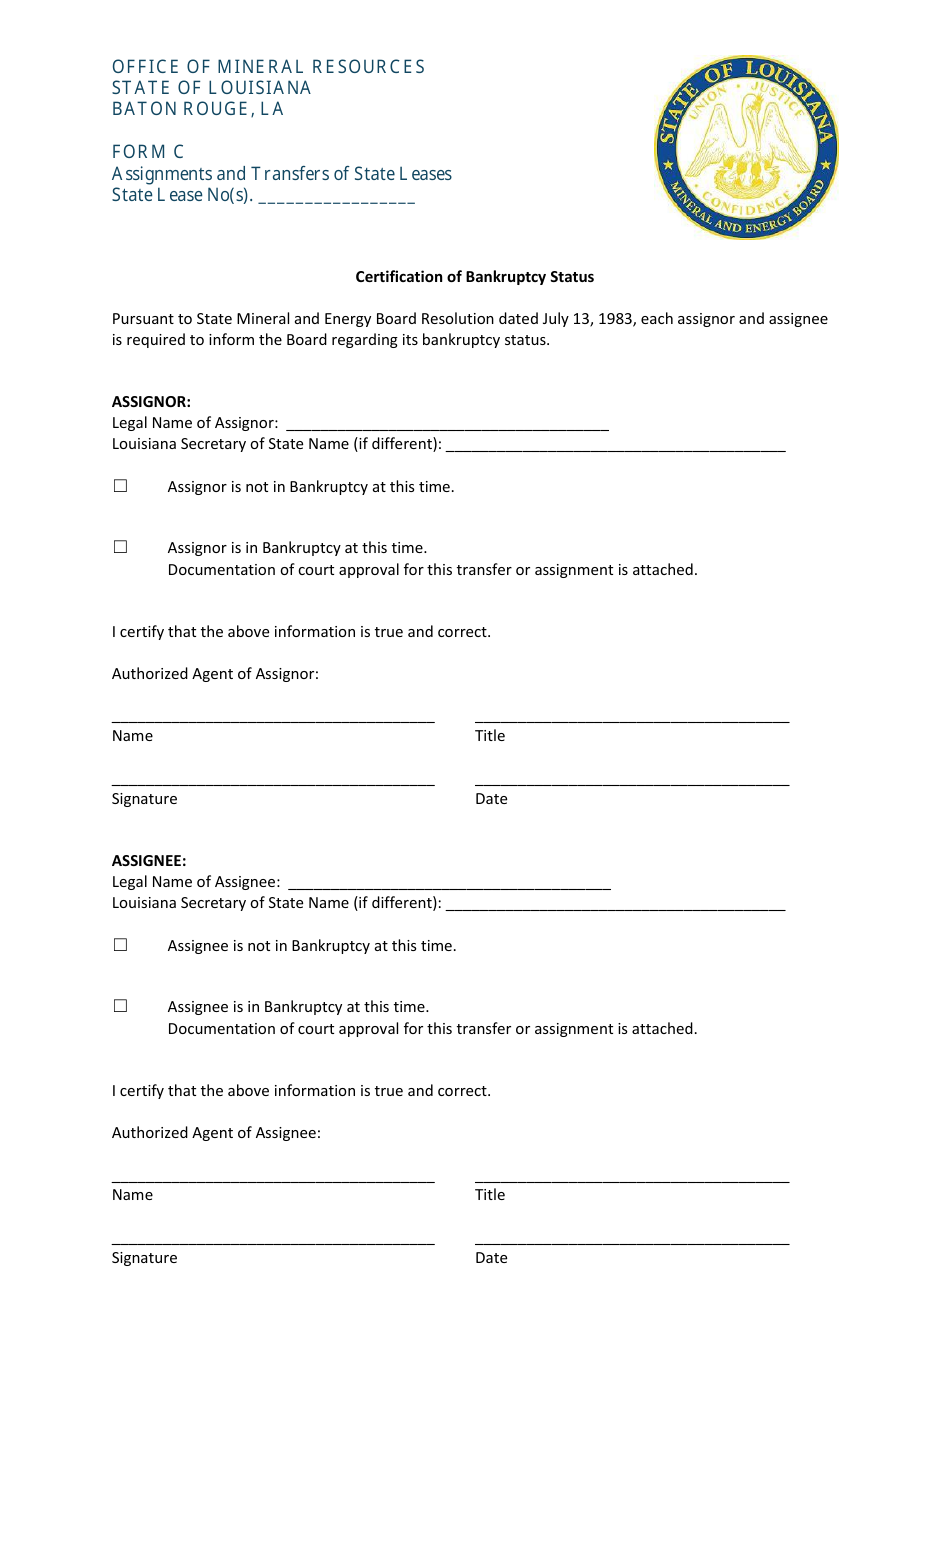 Form C Certification of Bankruptcy Status - Louisiana, Page 1